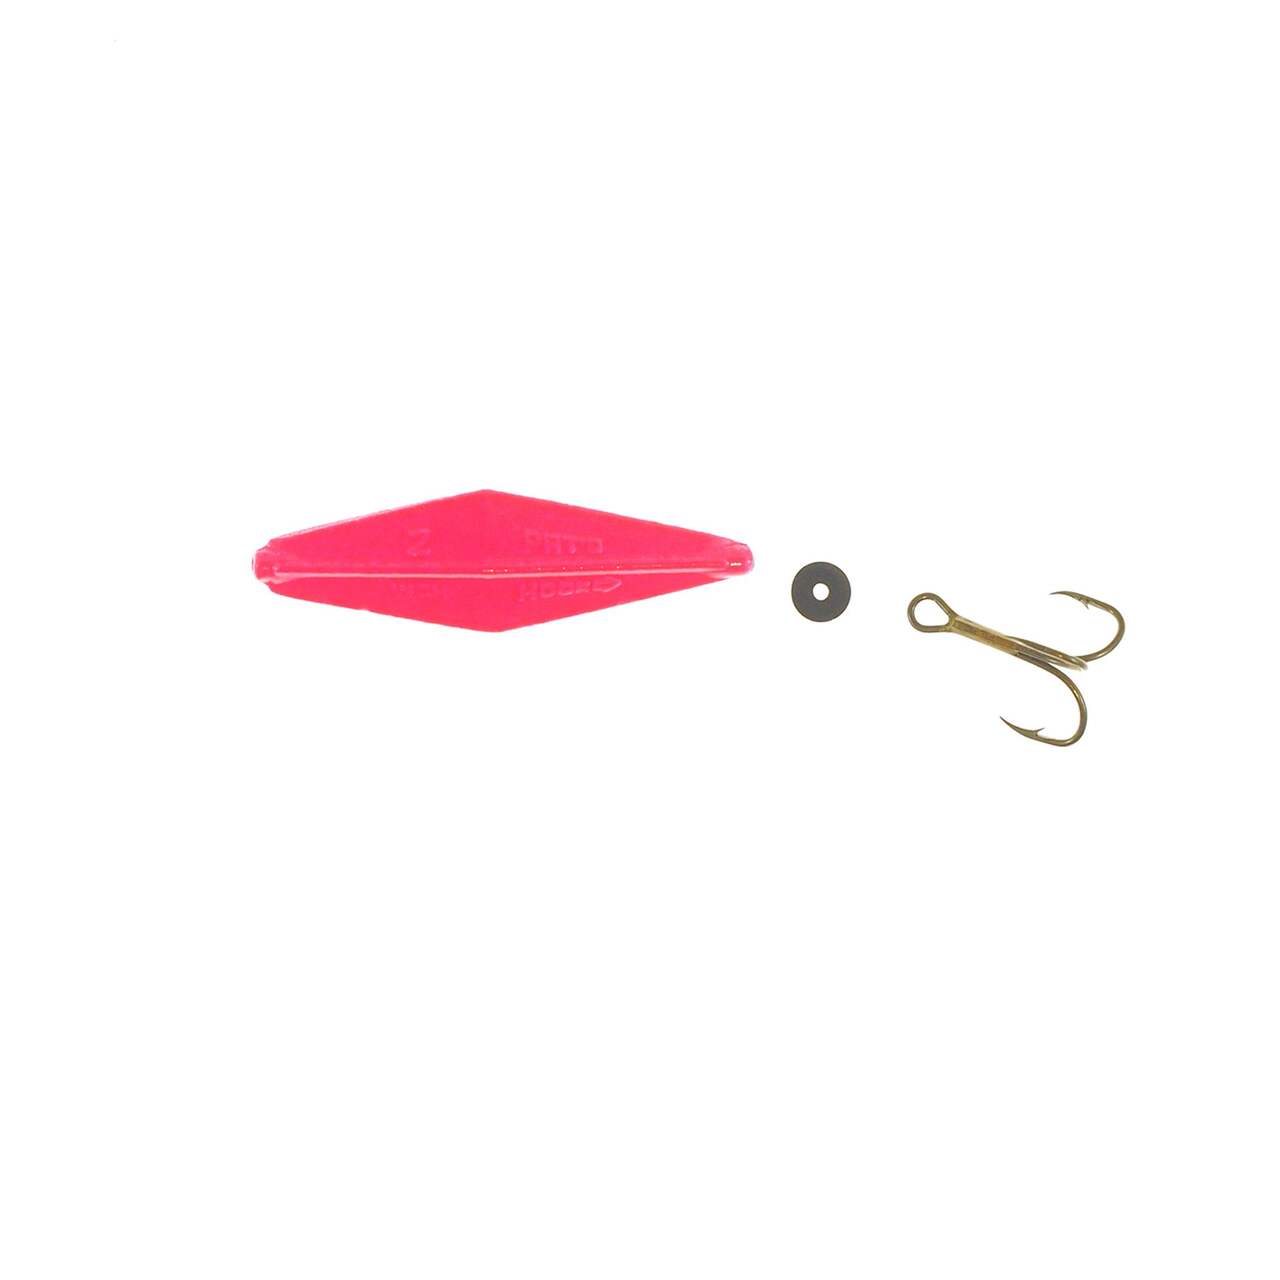 https://media-www.canadiantire.ca/product/playing/fishing/fishing-lures/0788880/buzz-bomb-lure-hot-pink-2--bff8d1f0-d9e4-404b-b4bd-764cc5d52765-jpgrendition.jpg?imdensity=1&imwidth=1244&impolicy=mZoom